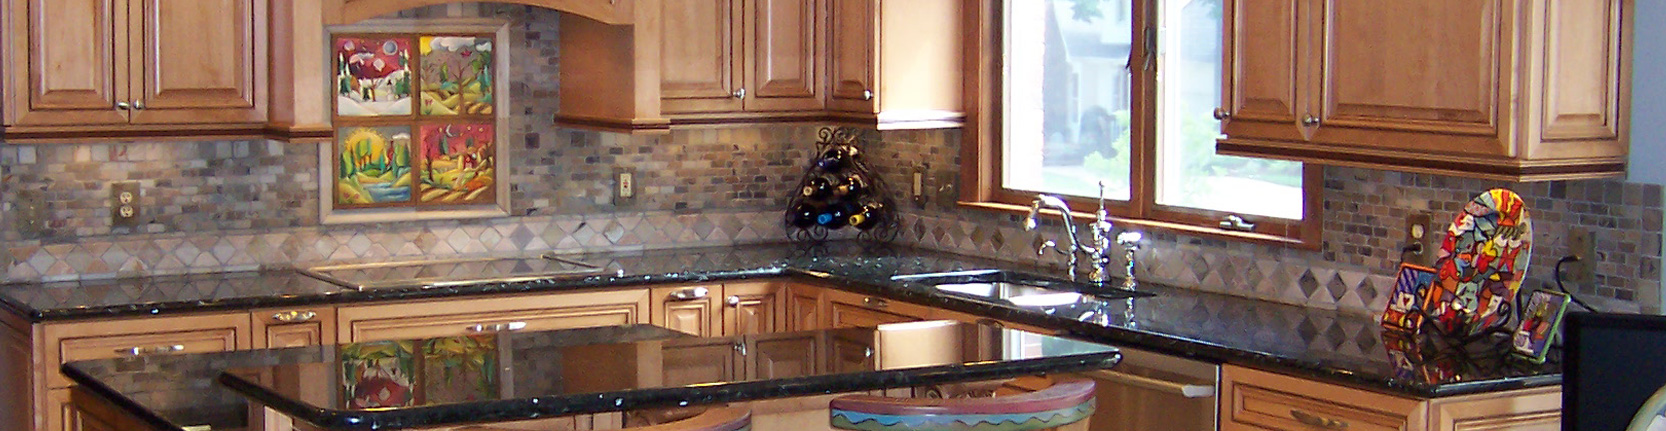 Kitchens with Granite Countertop  and Remodeling Contractors in VA